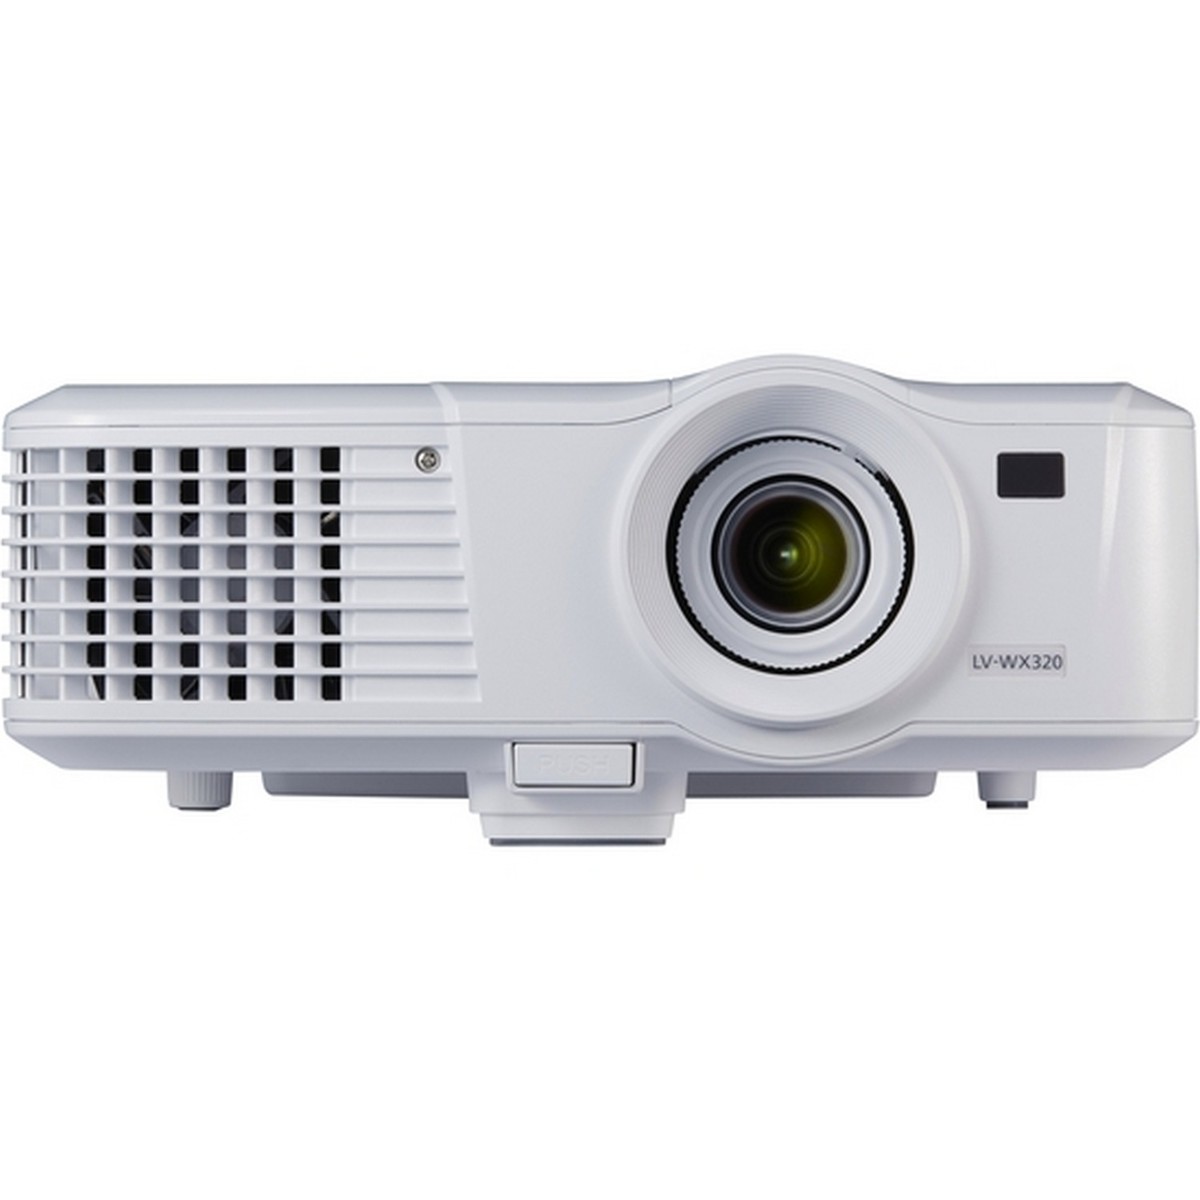 CANON LV-WX320 Projector, Computers & Tech, Parts & Accessories, Networking  on Carousell